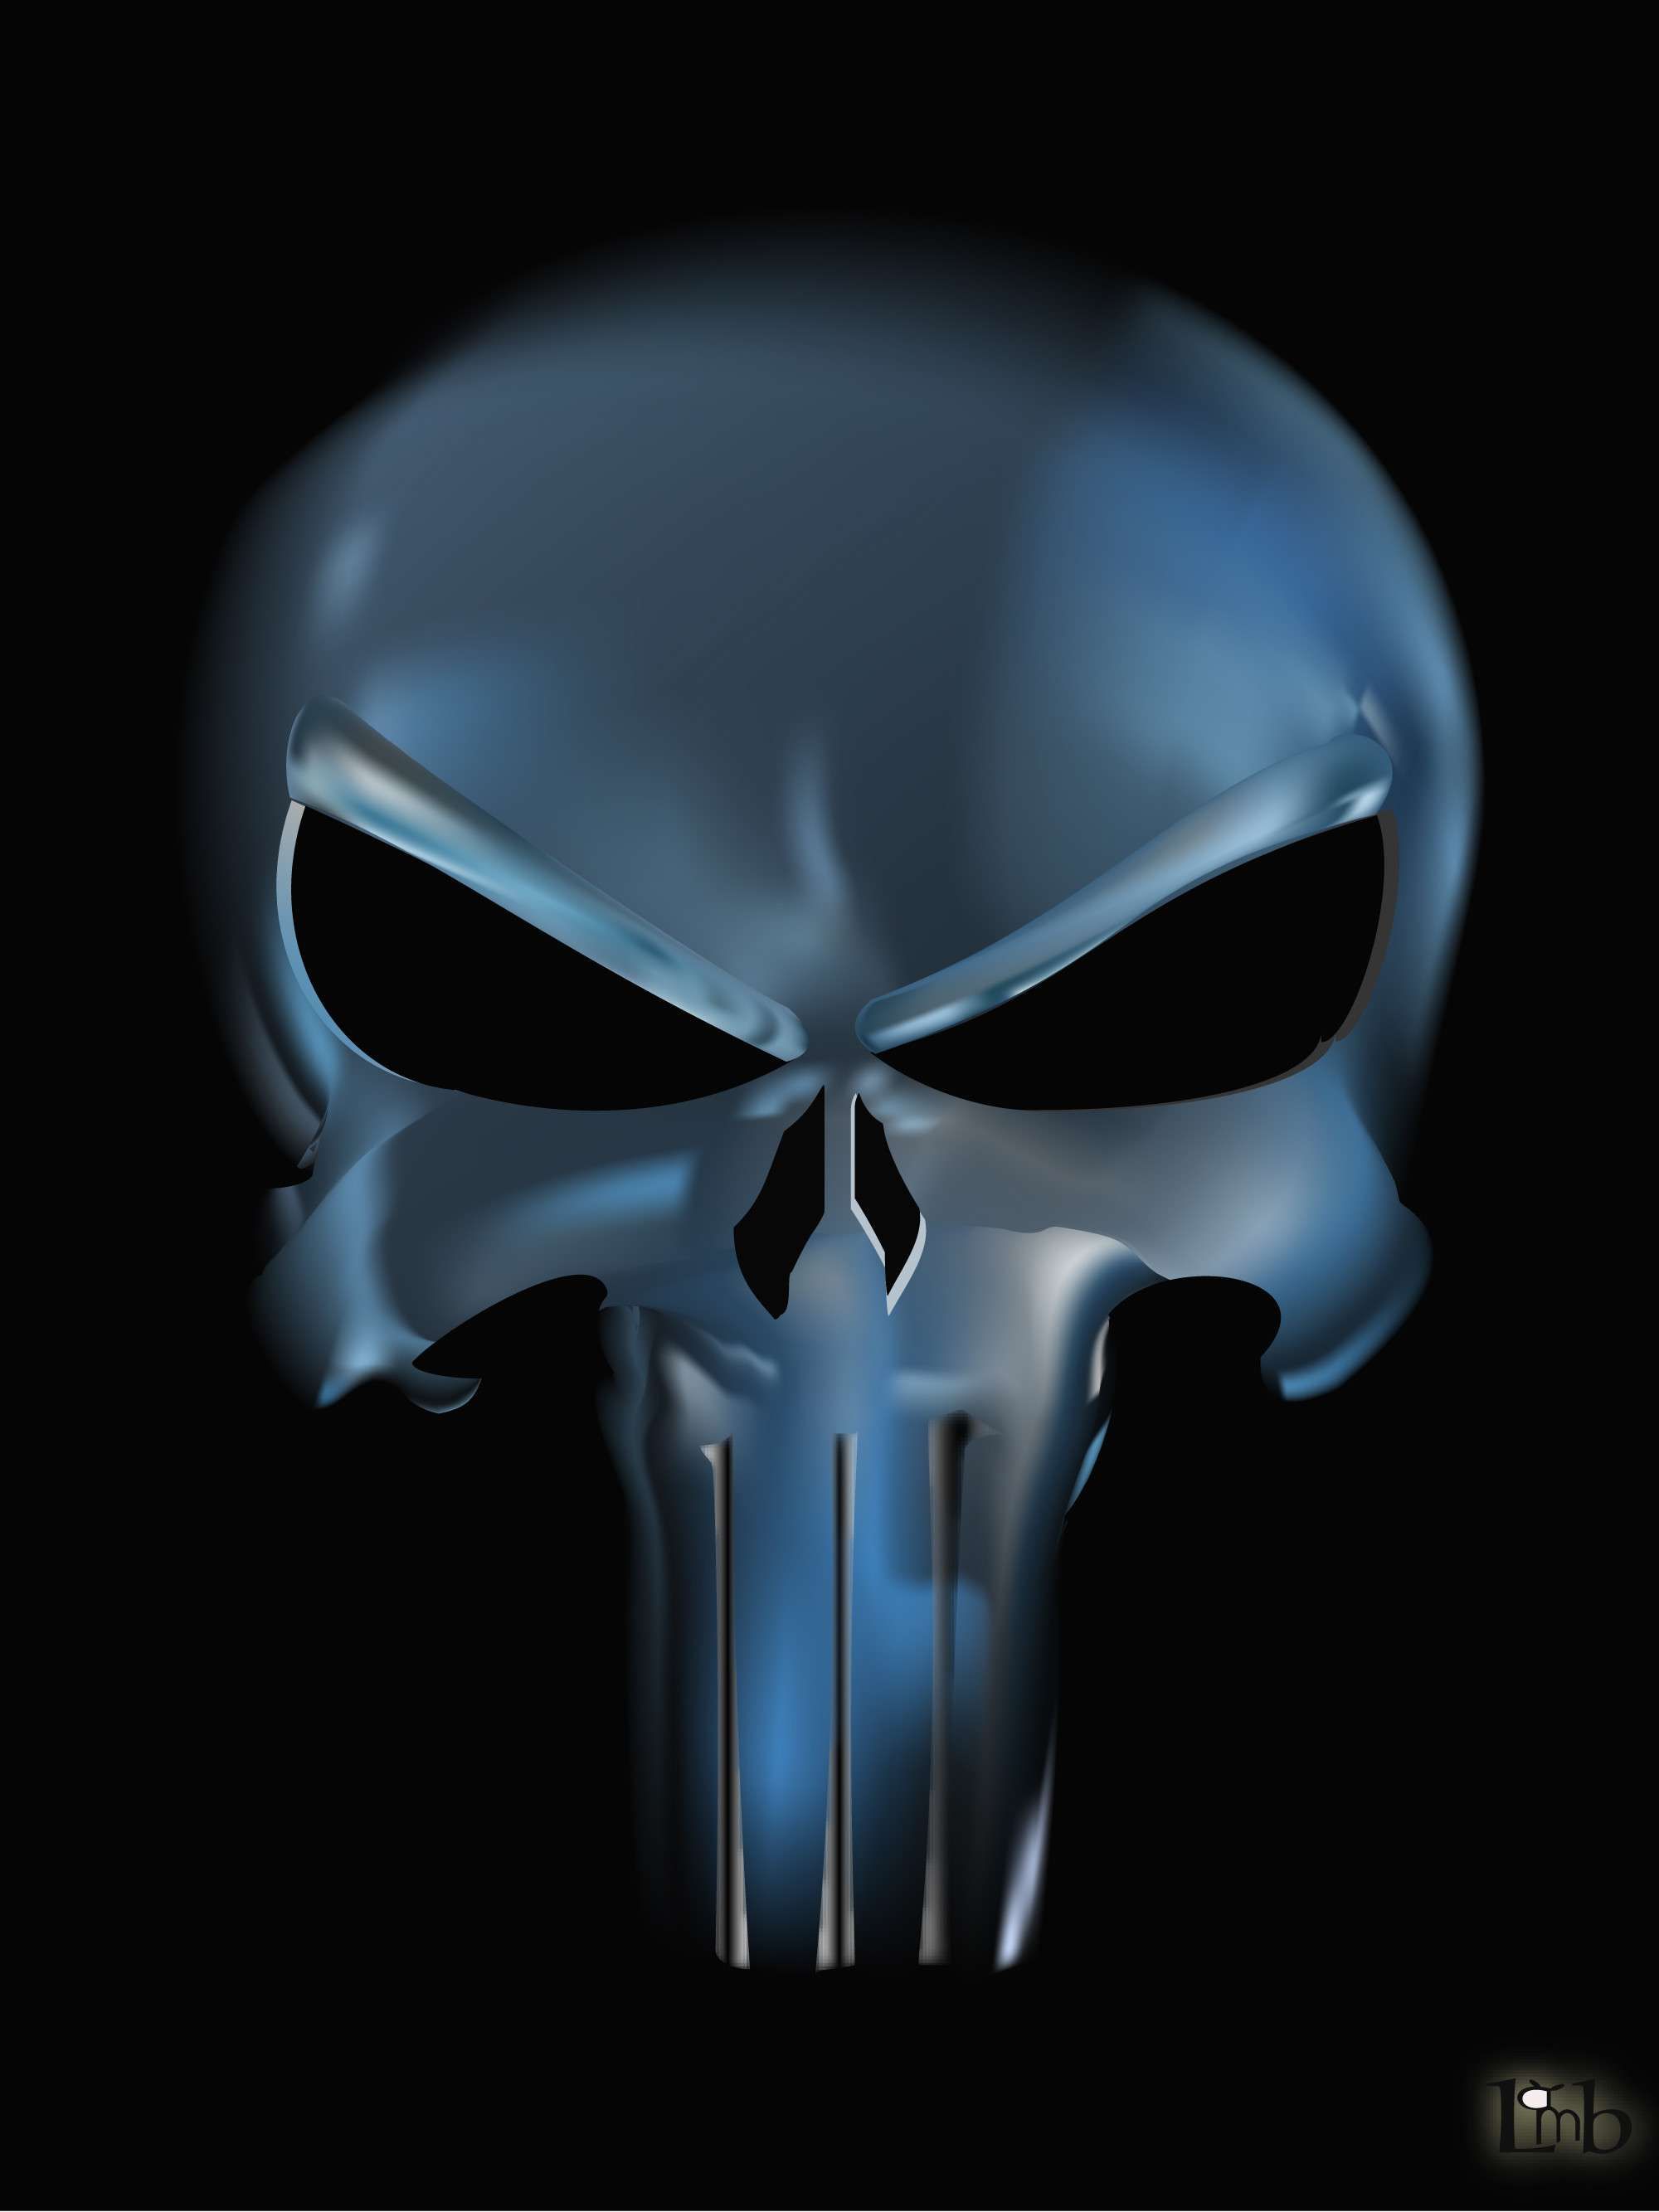 Punisher Skull Wallpaper HD For Android